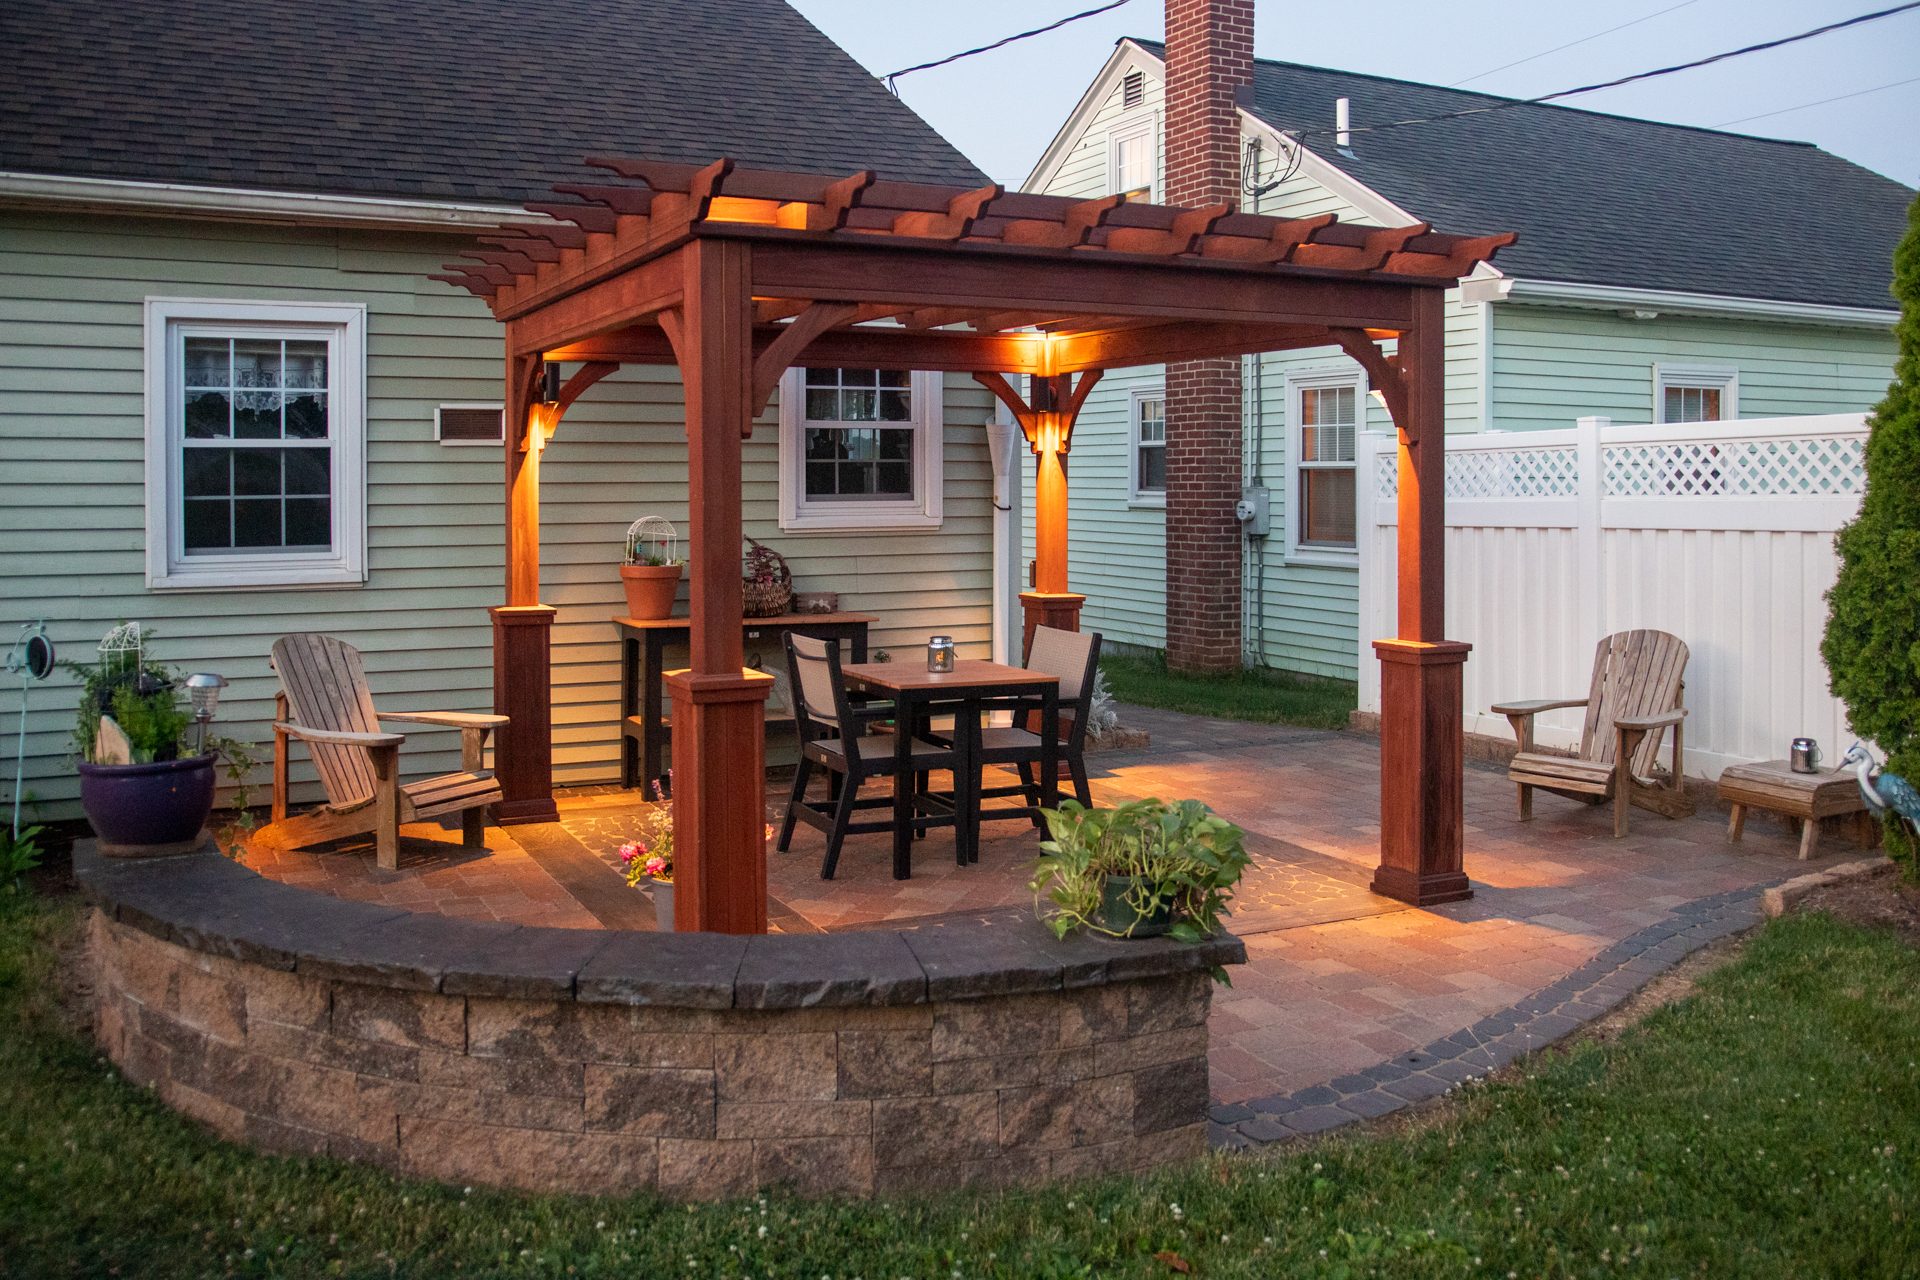 Elegant outdoor space with a pergola and paver patio.